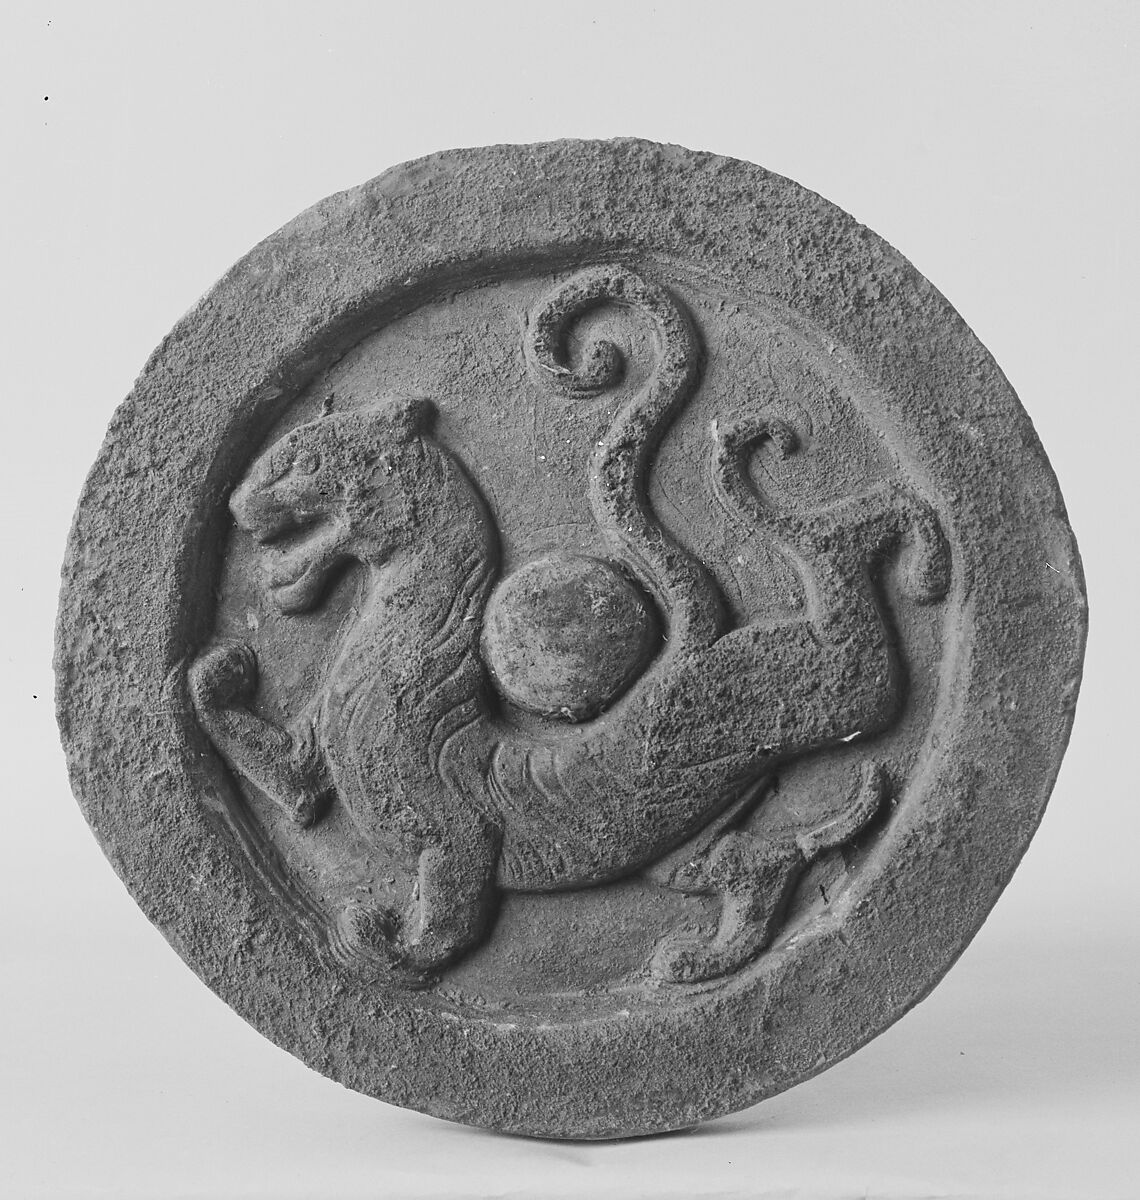 Roof tile end with tiger, Earthenware, China